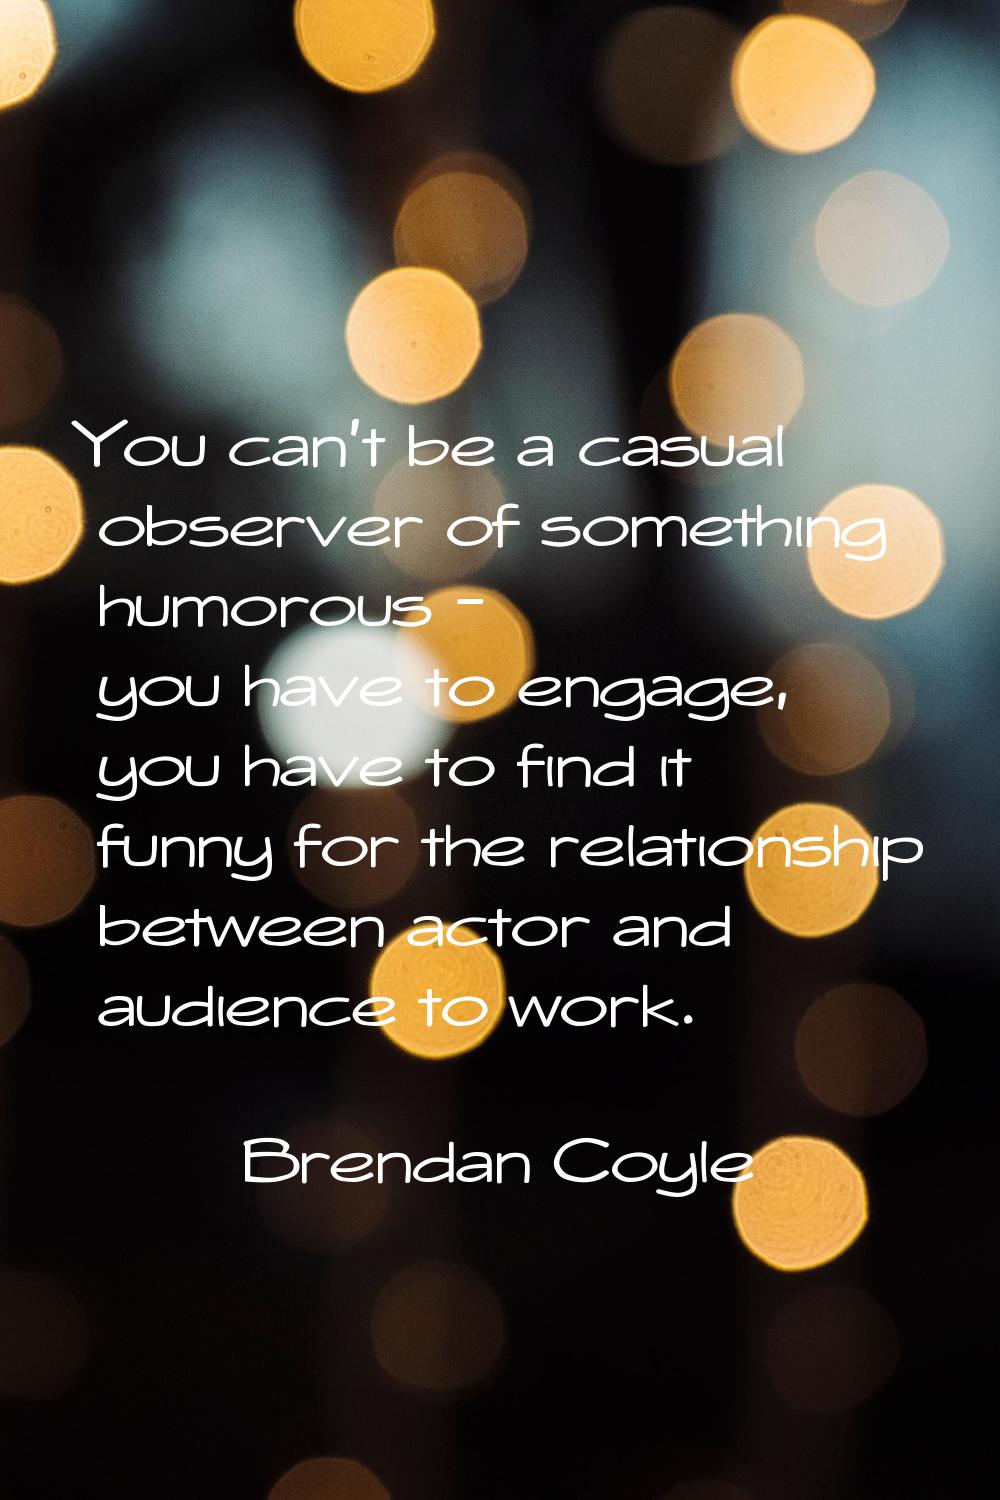 You can't be a casual observer of something humorous - you have to engage, you have to find it funn